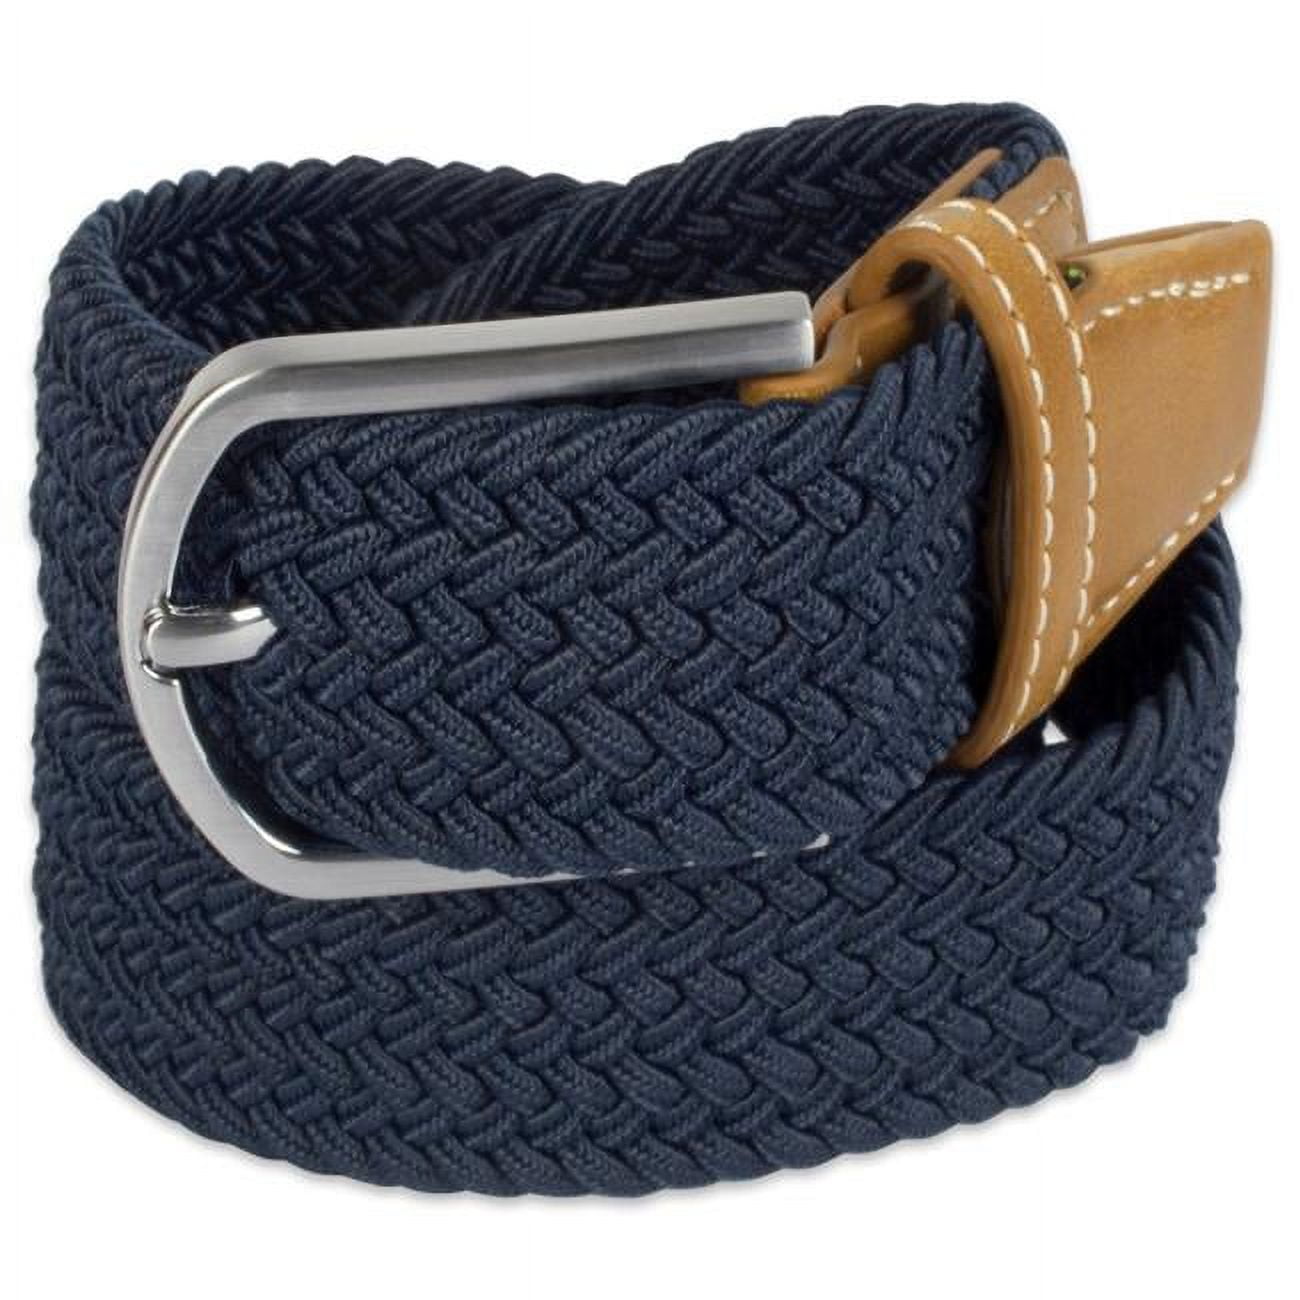 Two Tone 32mm Braided Belt in Light Brown